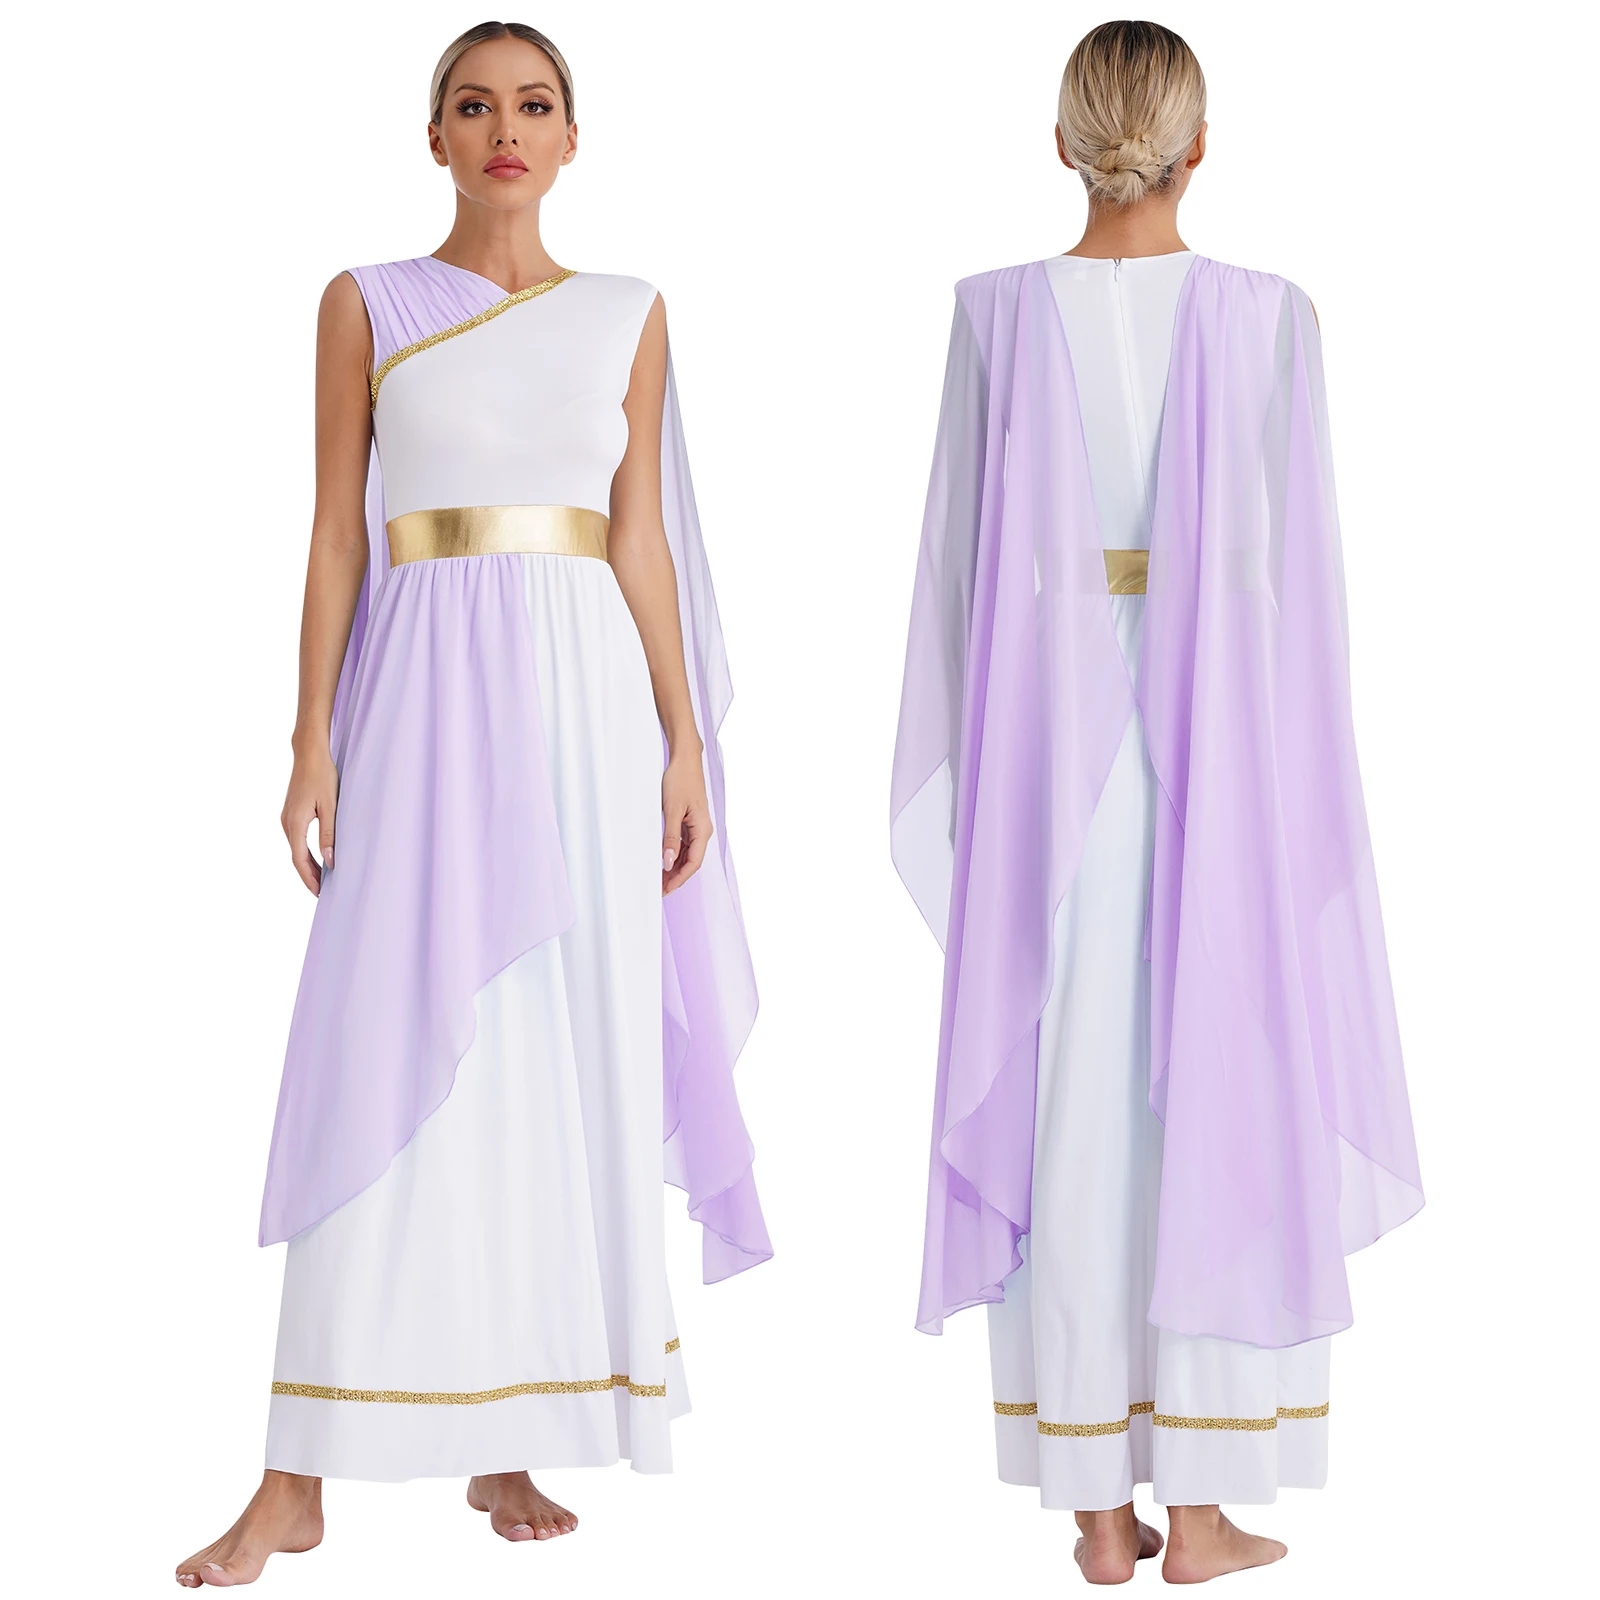 

Womens Ancient Greek Princess Cosplay Costume Theme Party Greece Roman Queen Role Play Chiffon Gold Trims Vintage Toga Dress